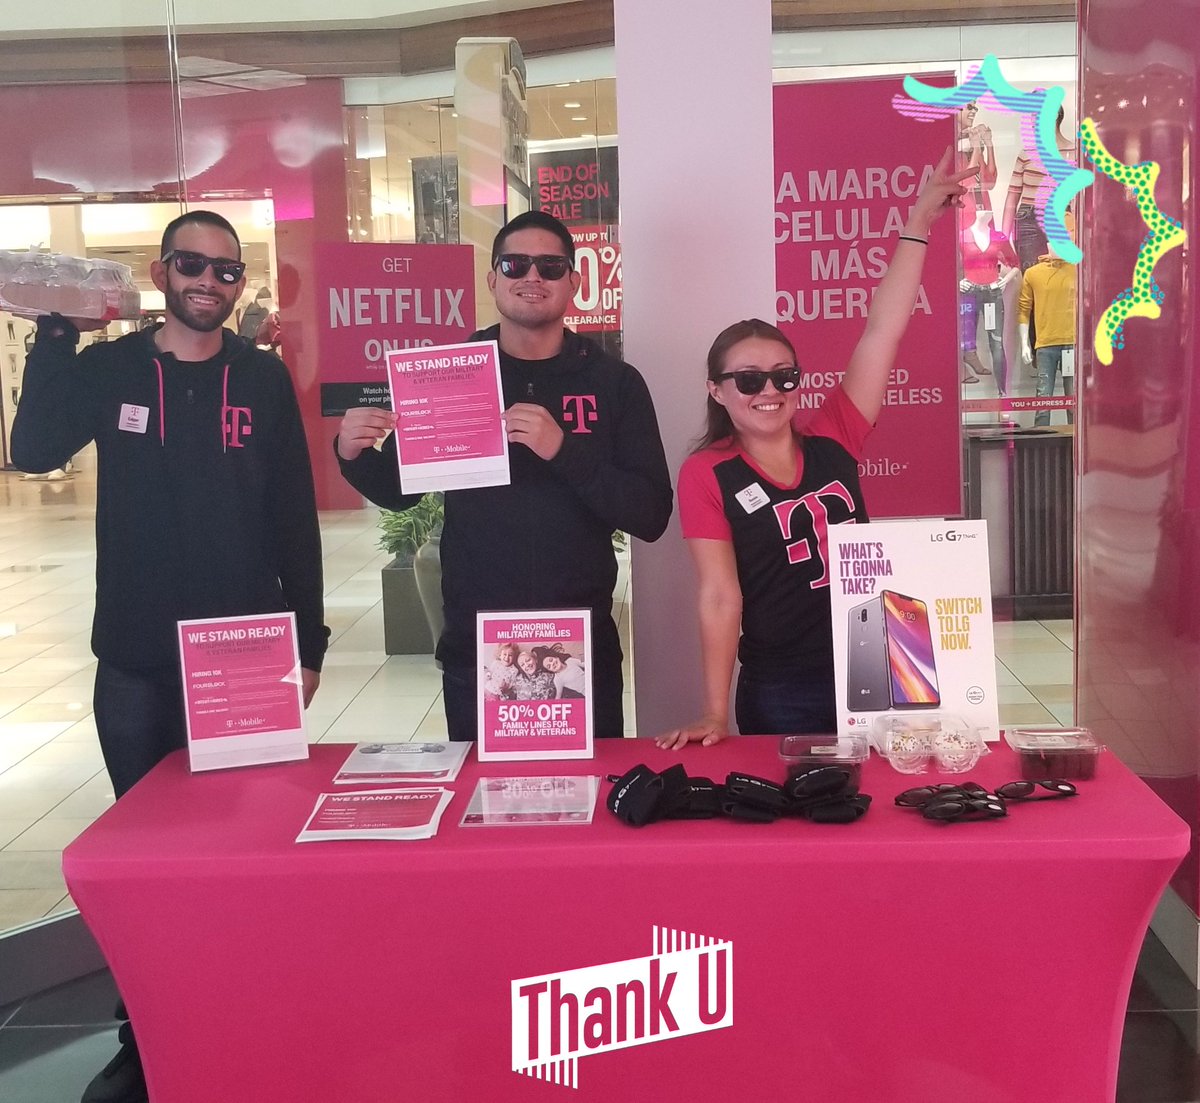 Big THANK YOU today from Sherwood mall T-Mobile in stocton to all of the active duty members and veterans of U.S. Military! #MobilizeForService #MilitaryAppreciation 🇺🇸🇺🇸🇺🇸 @WcboundGh @Raflague @MiriamB66